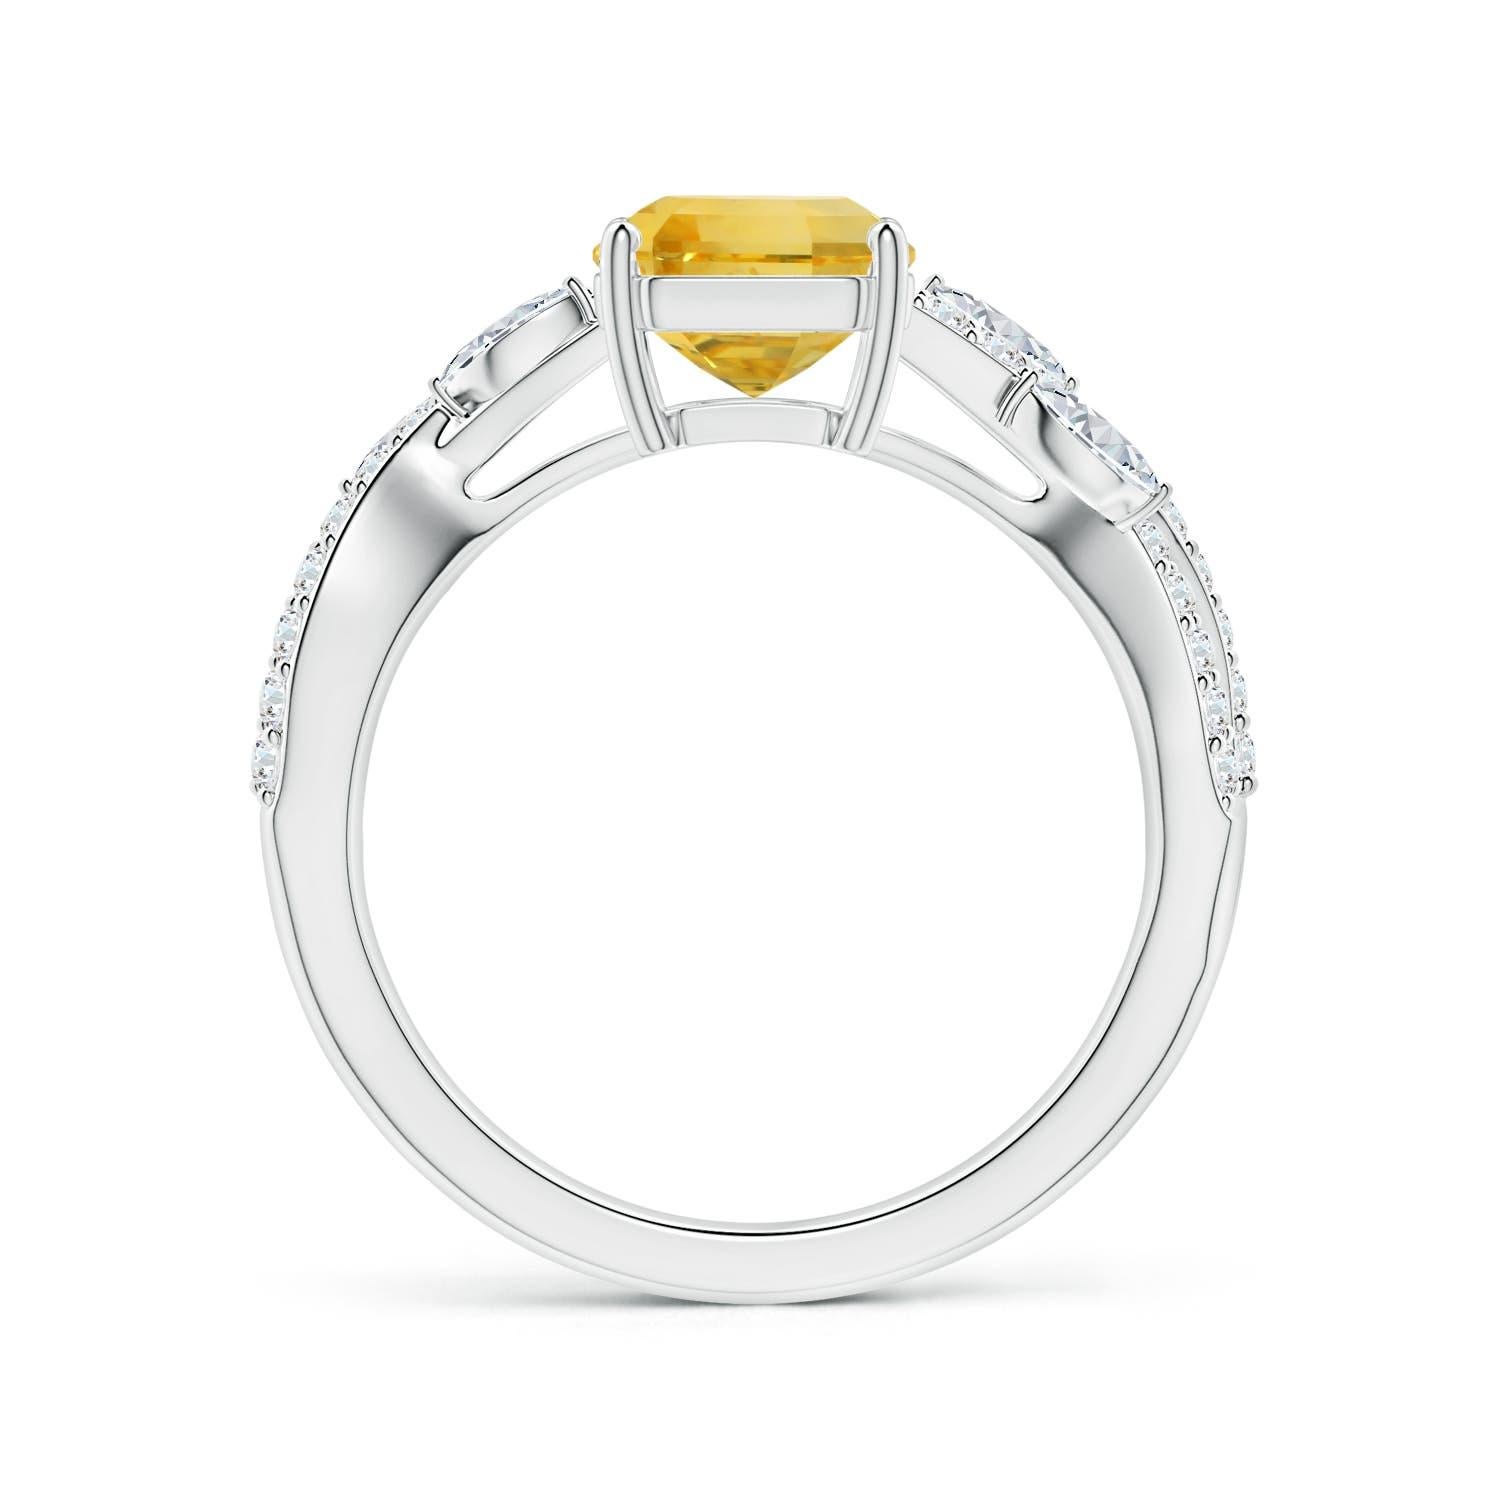 For Sale:  ANGARA GIA Certified Emerald-Cut Yellow Sapphire Ring in Platinum with Diamonds 2